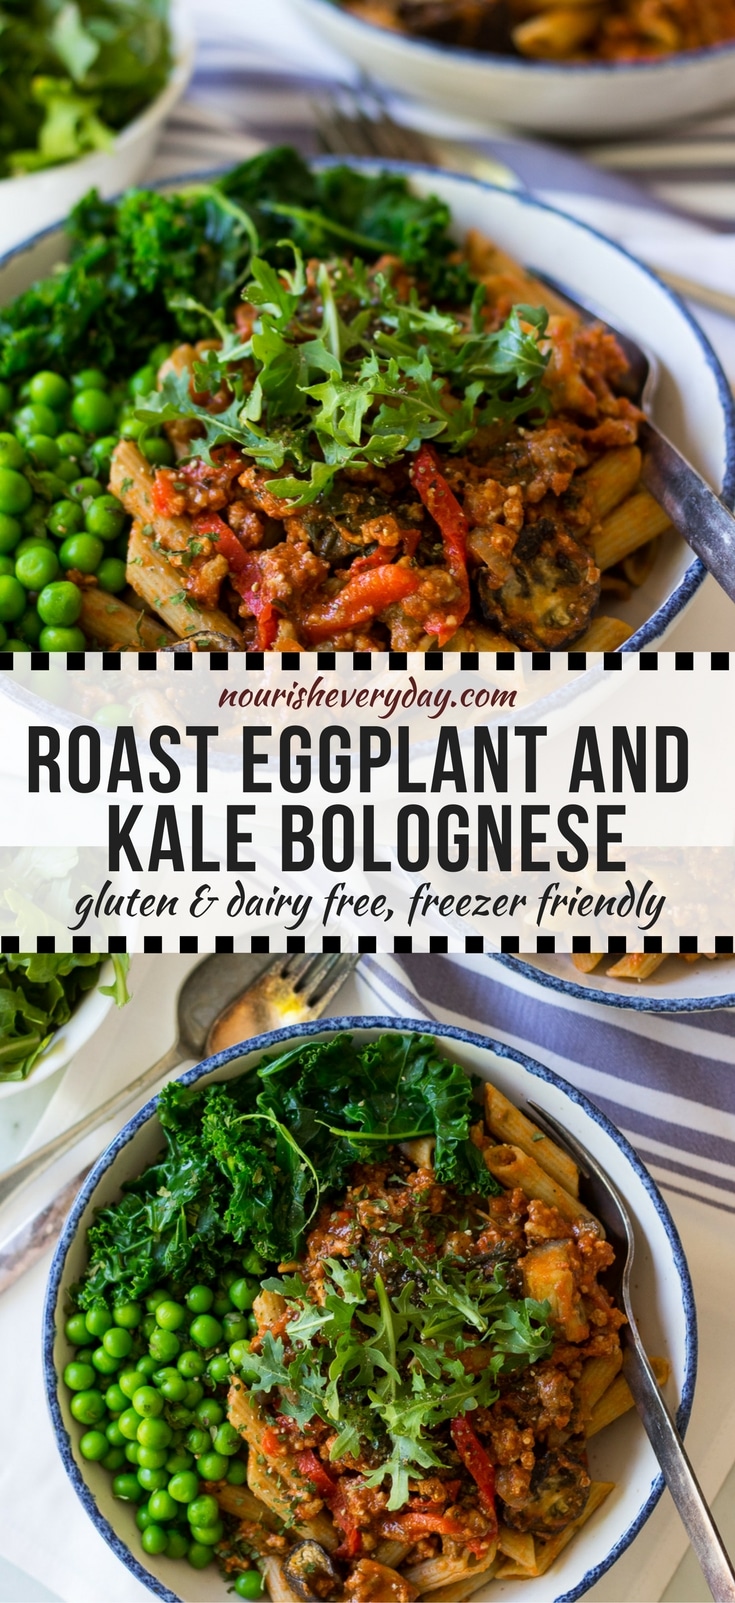 Roast Eggplant and Kale Bolognese is a hearty, healthy meal that's easy to prepare and freezes well too. Gluten free and dairy free, a great sauce over gluten free pasta or spiralised veg for a #paleo option. #healthybolognese #glutenfreepasta